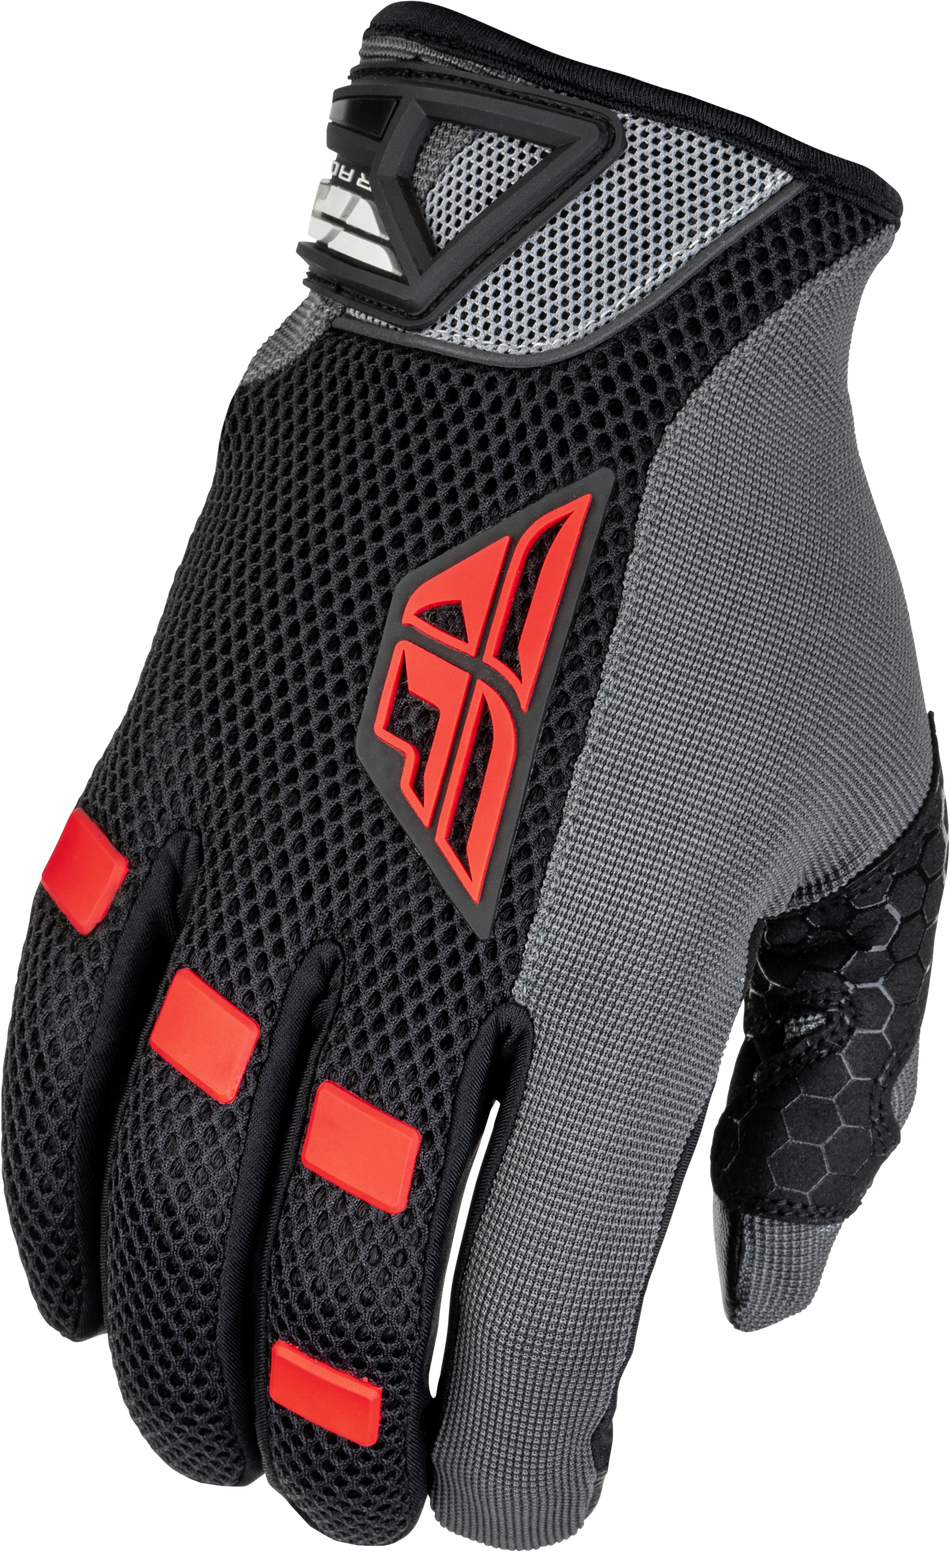 FLY RACING Coolpro Gloves Black/Red Lg 476-4026L